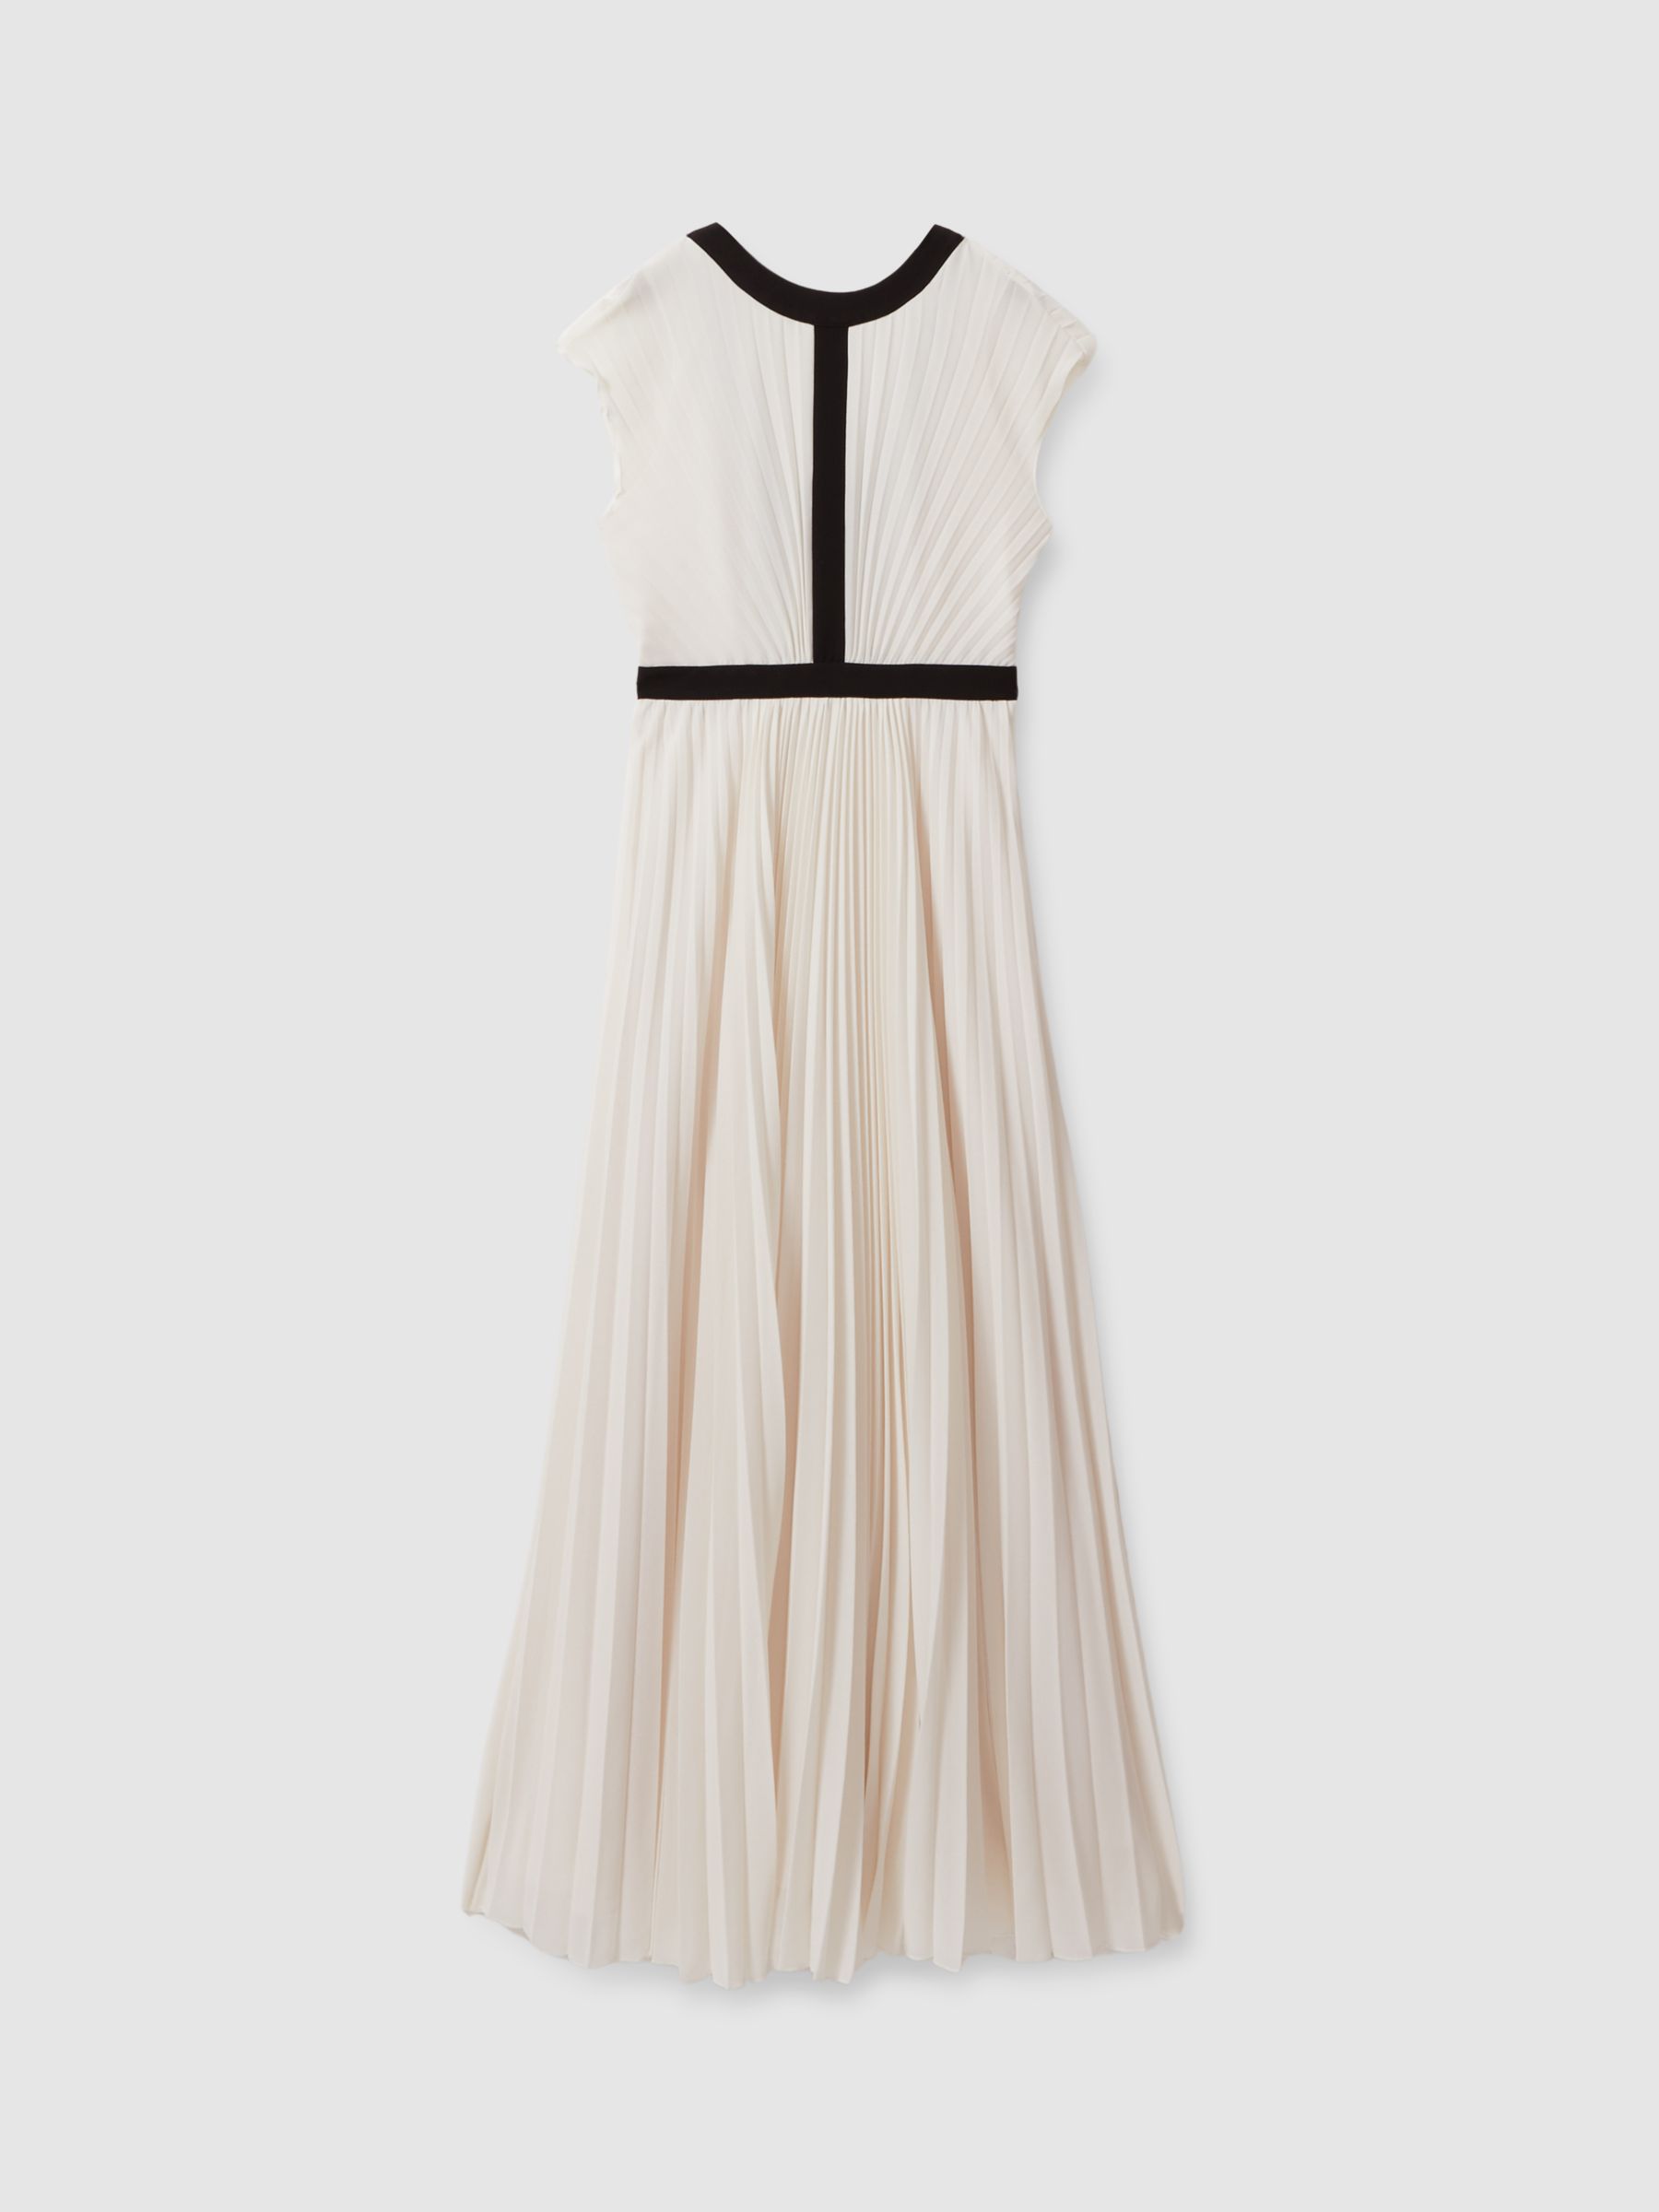 Reiss Harley Pleated Maxi Dress, White, 6